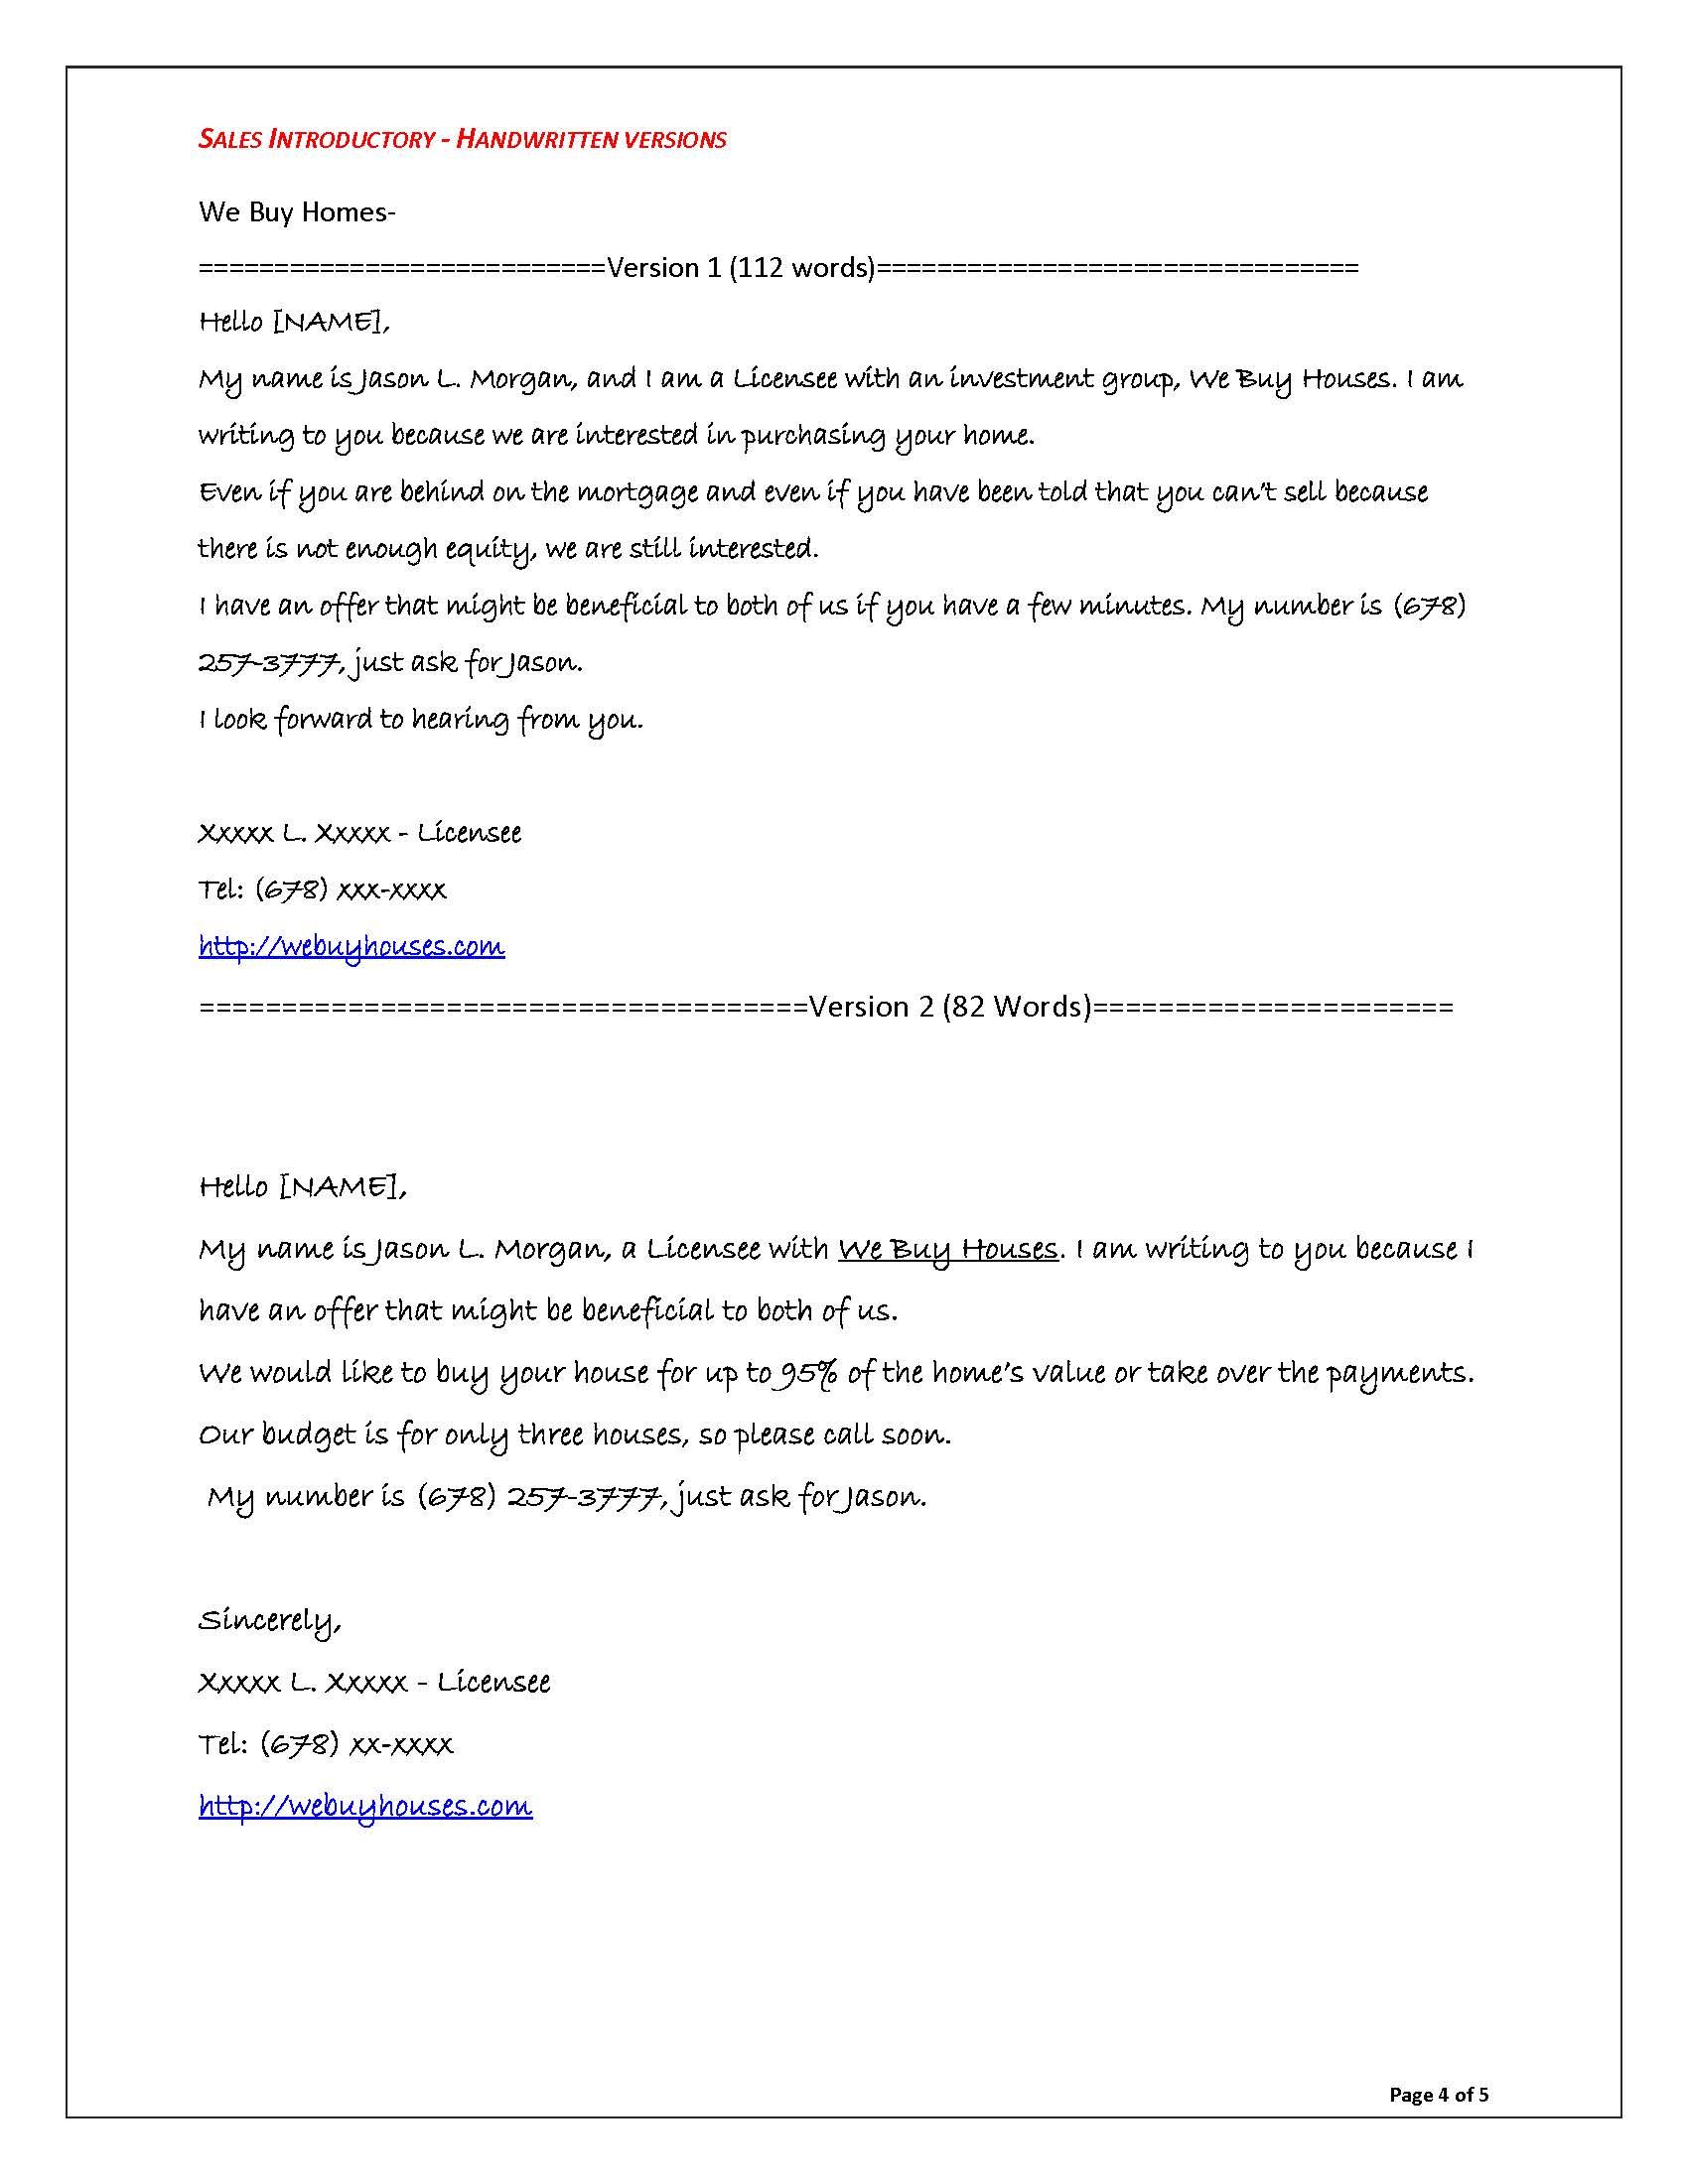 Sales Letter Series - Real Estate Co._Page_4